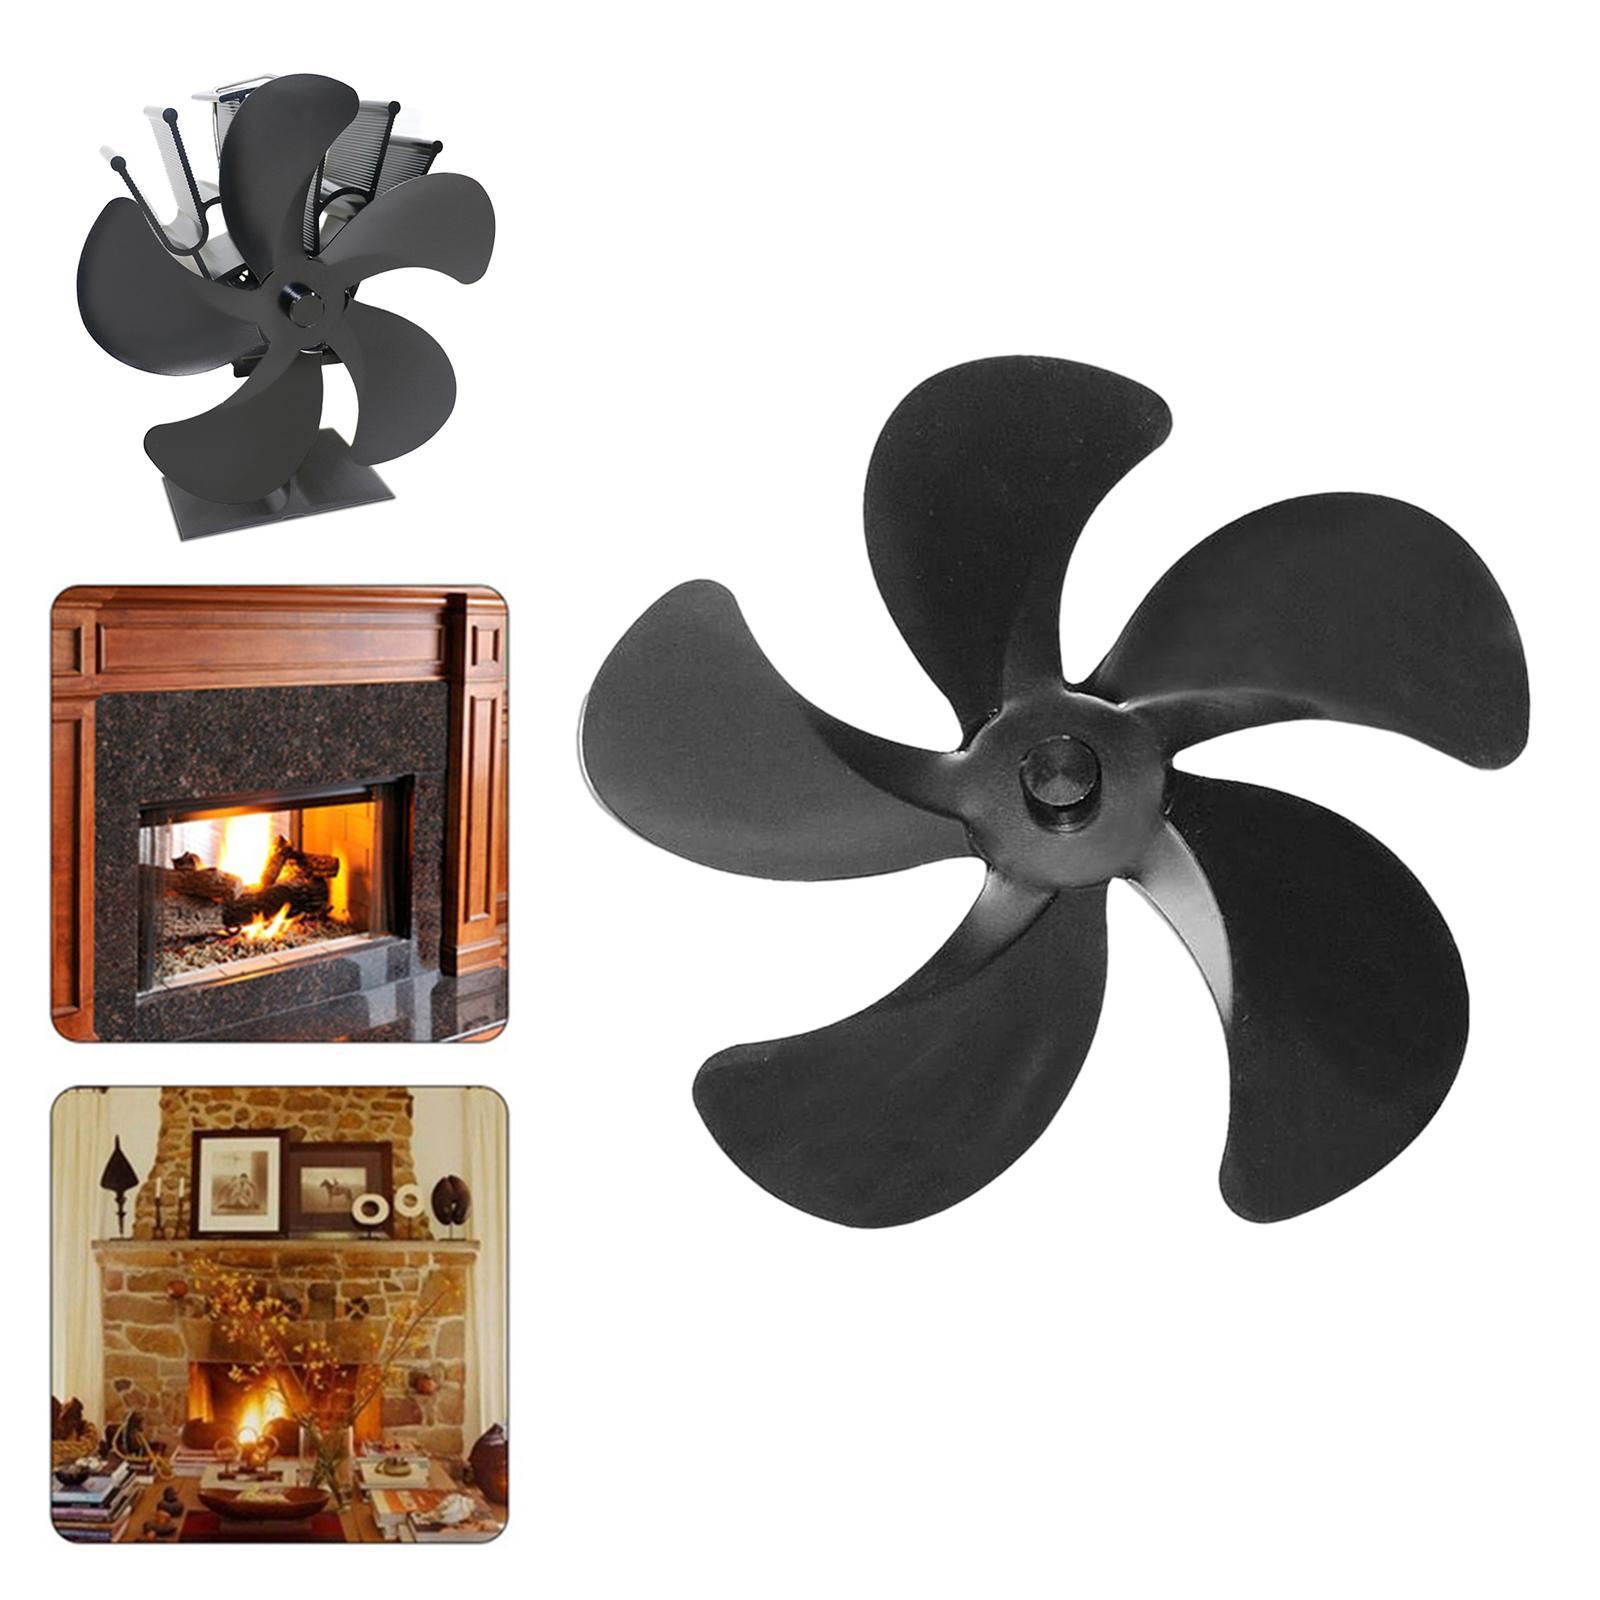 Stove Fan Replacement Blades Universal Wood-Burning Stoves Accessory Black